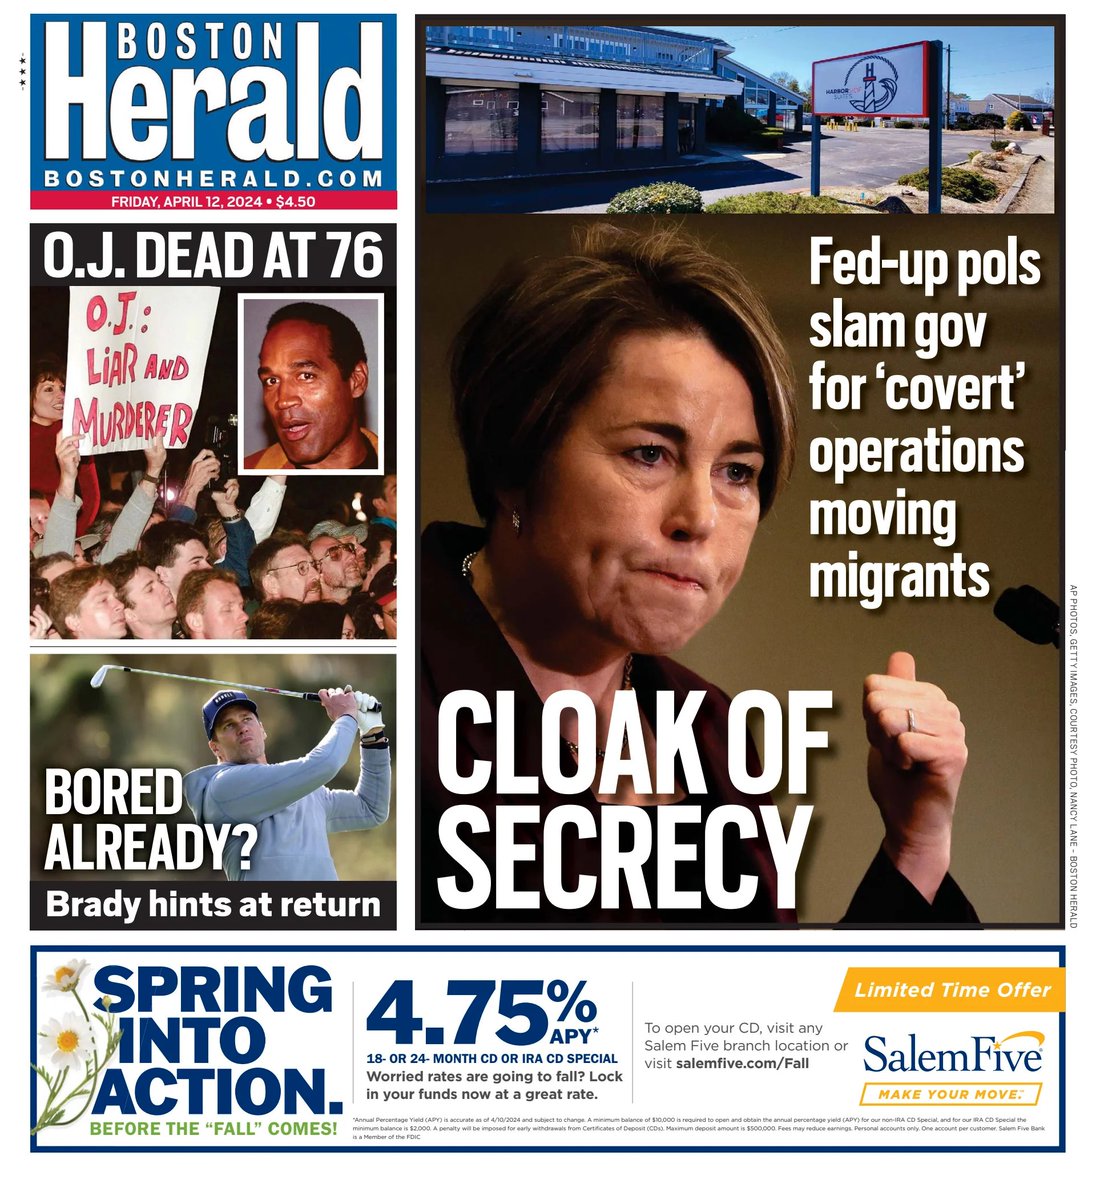 🇺🇸 Cloak Of Secrecy

▫Fed-up pols slam gov for 'covert' operations moving migrants

#frontpagestoday #USA @bostonherald 🇺🇸